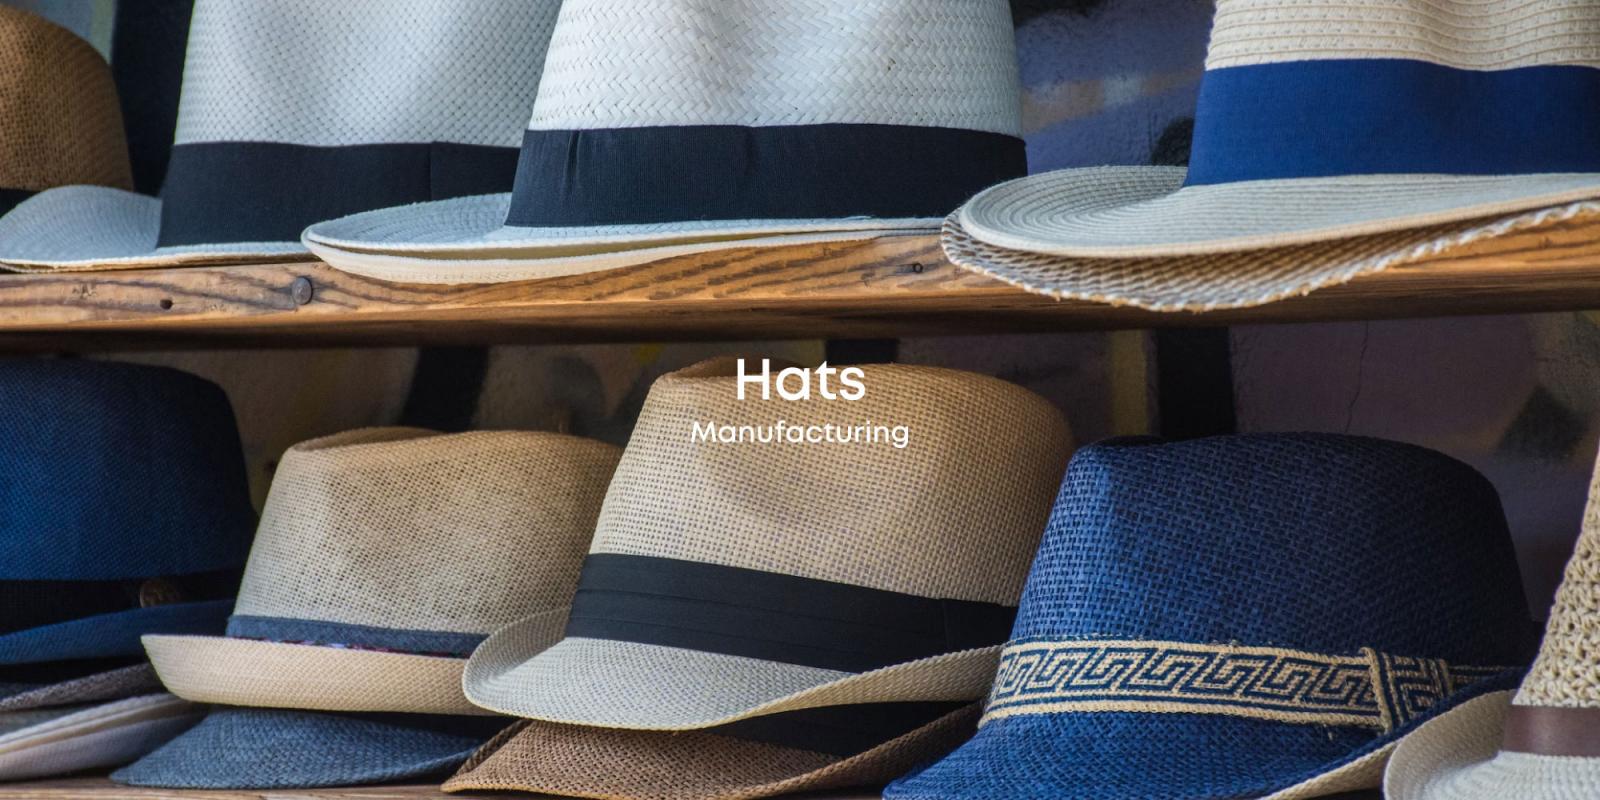 Hats Manufacturing